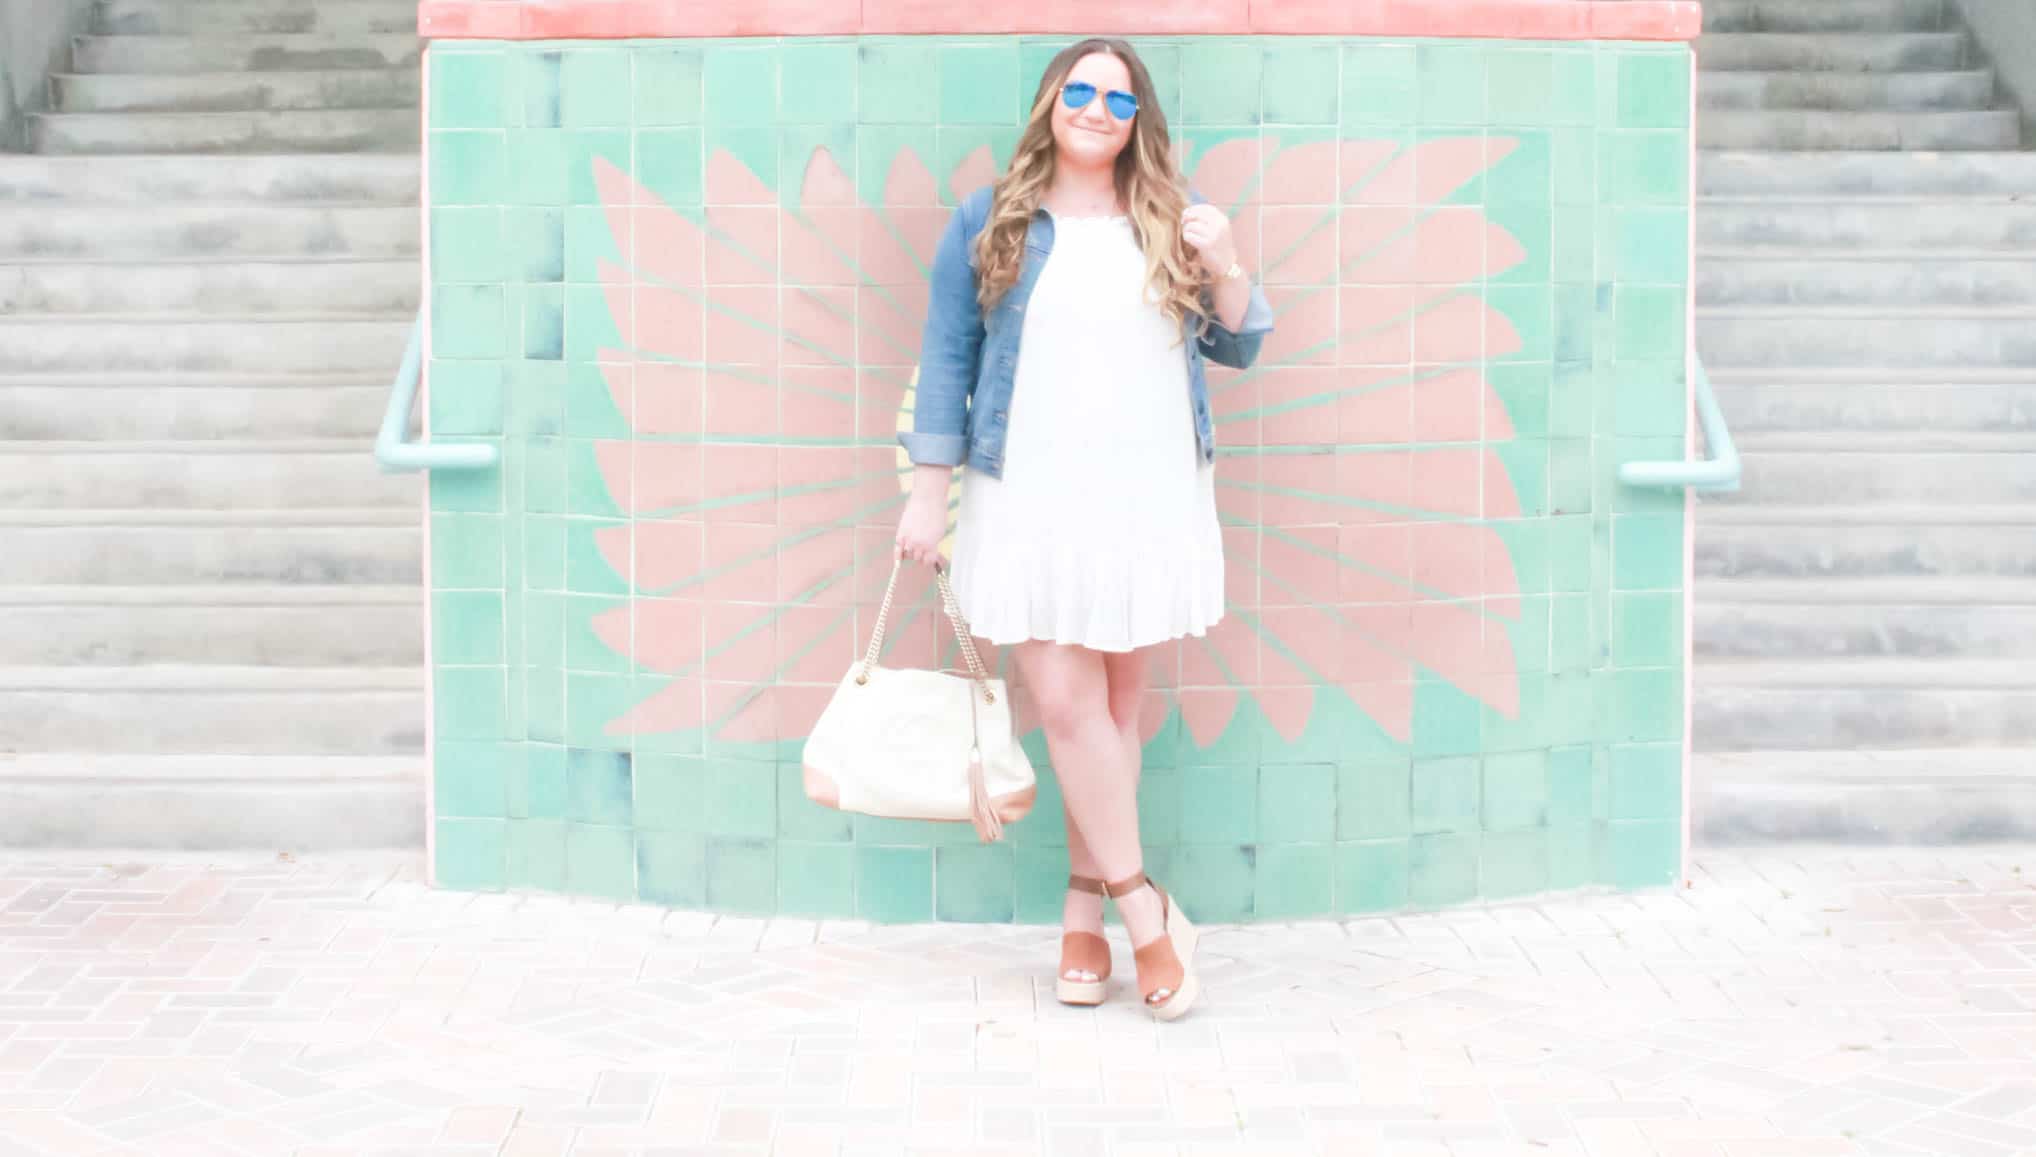 missyonmadison, gucci soho tote, fashion inspo, outfit inspo, missyonmadison blog, missyonmadison instagram, melissa tierney, fashion blog, fashion blogger,style blog, style blogger, gucci, gucci white soho tote, raybans, old navy denim jacket,white tart collections dress, tart collections liz dress, marc fischer shoes, tan platform wedges, summer style, spring style, summer 2018 style, la blogger,